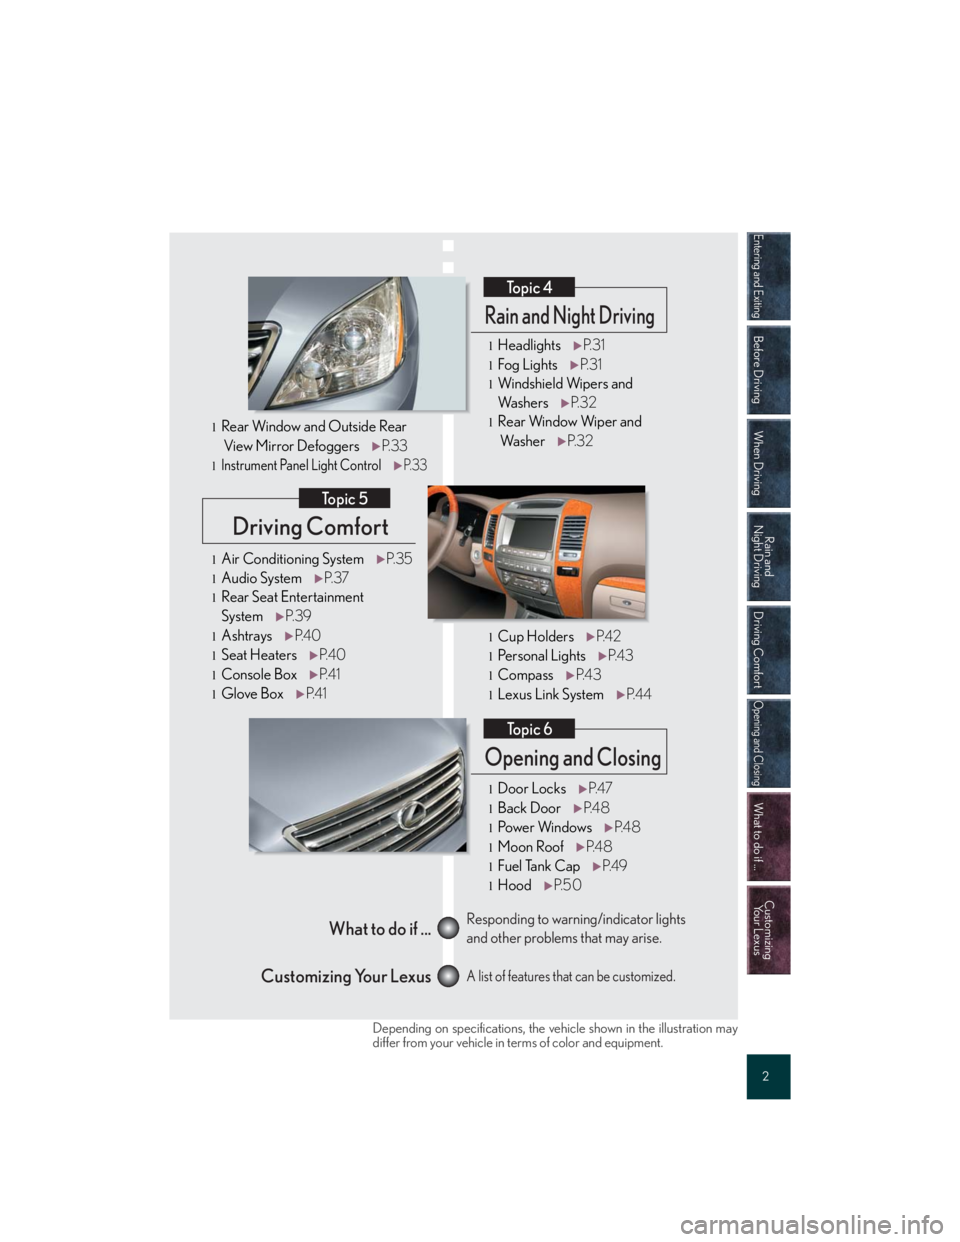 Lexus GX470 2007  Theft deterrent system / Entering and Exiting
Before Driving
When Driving
Rain and 
Night Driving
Driving Comfort
Opening and Closing
What to do if ...
Customizing
Yo u r  L e x u s
2
Driving Comfort
Topic 5
Opening and Closi